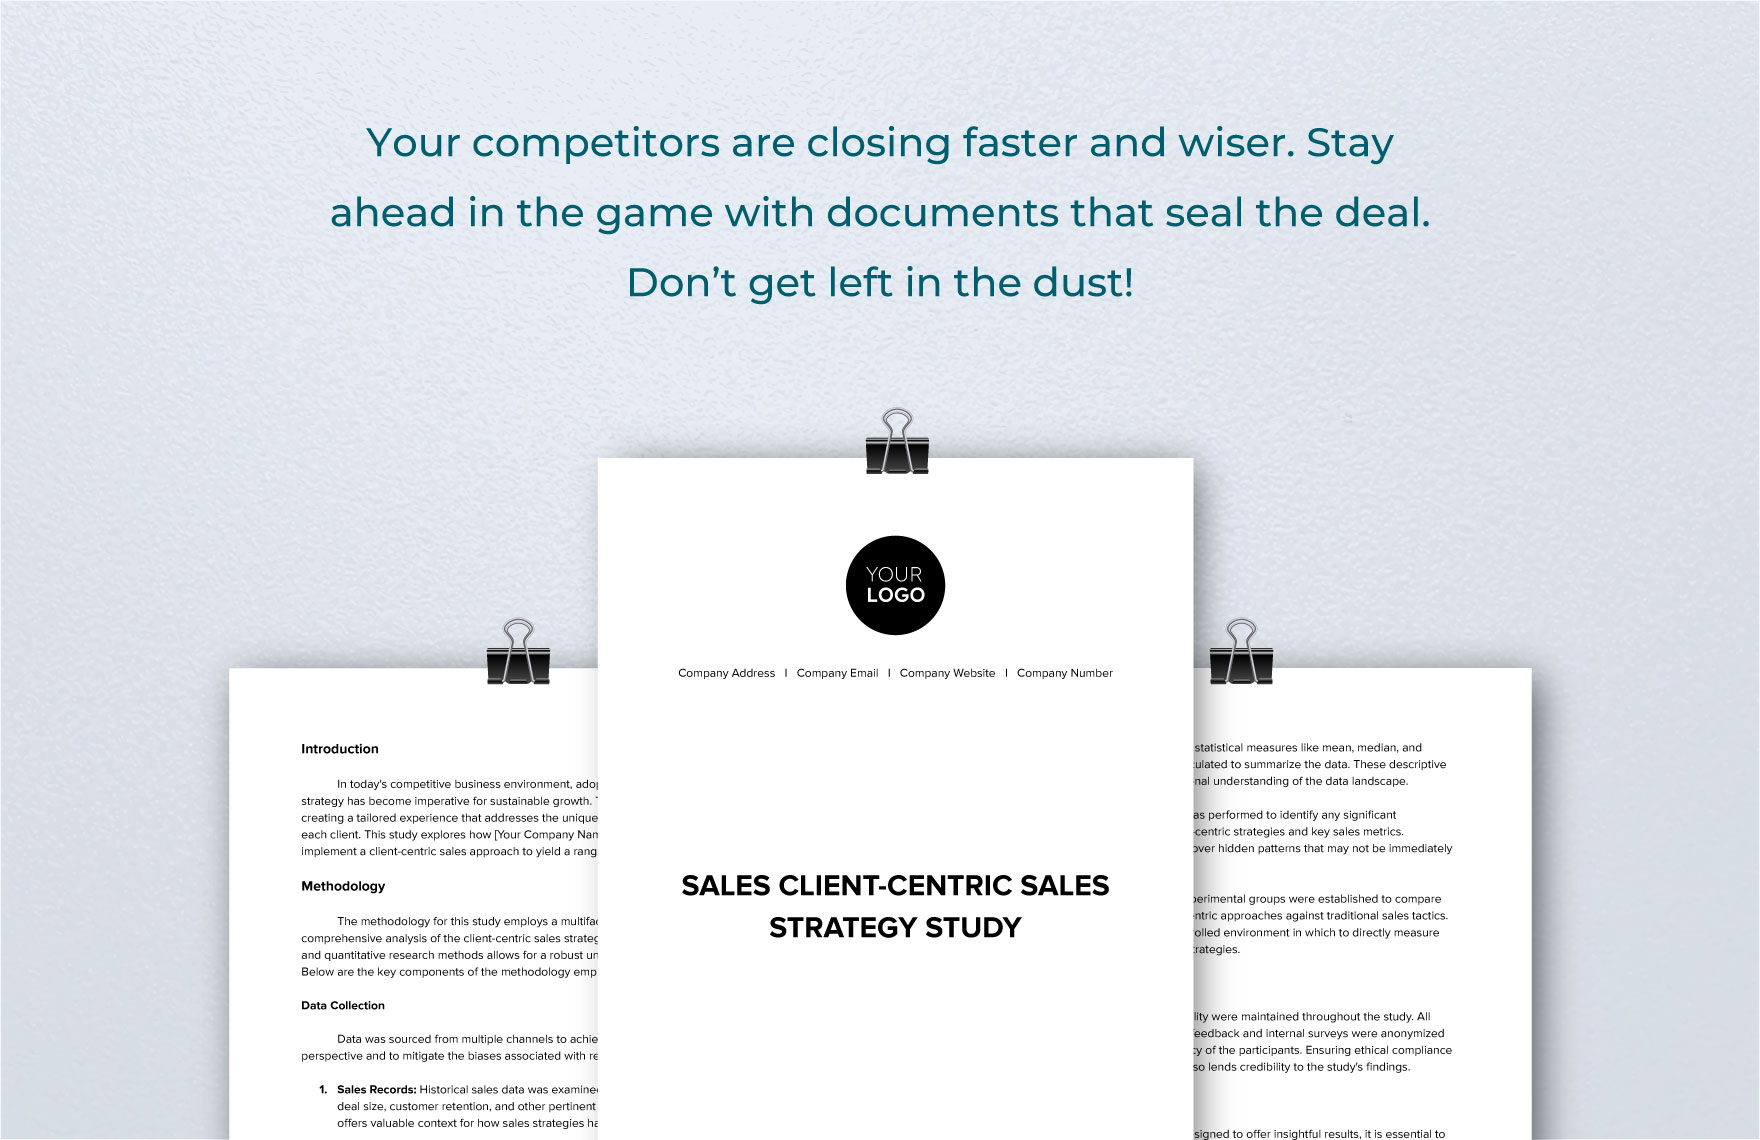 Sales Client-Centric Sales Strategy Study Template